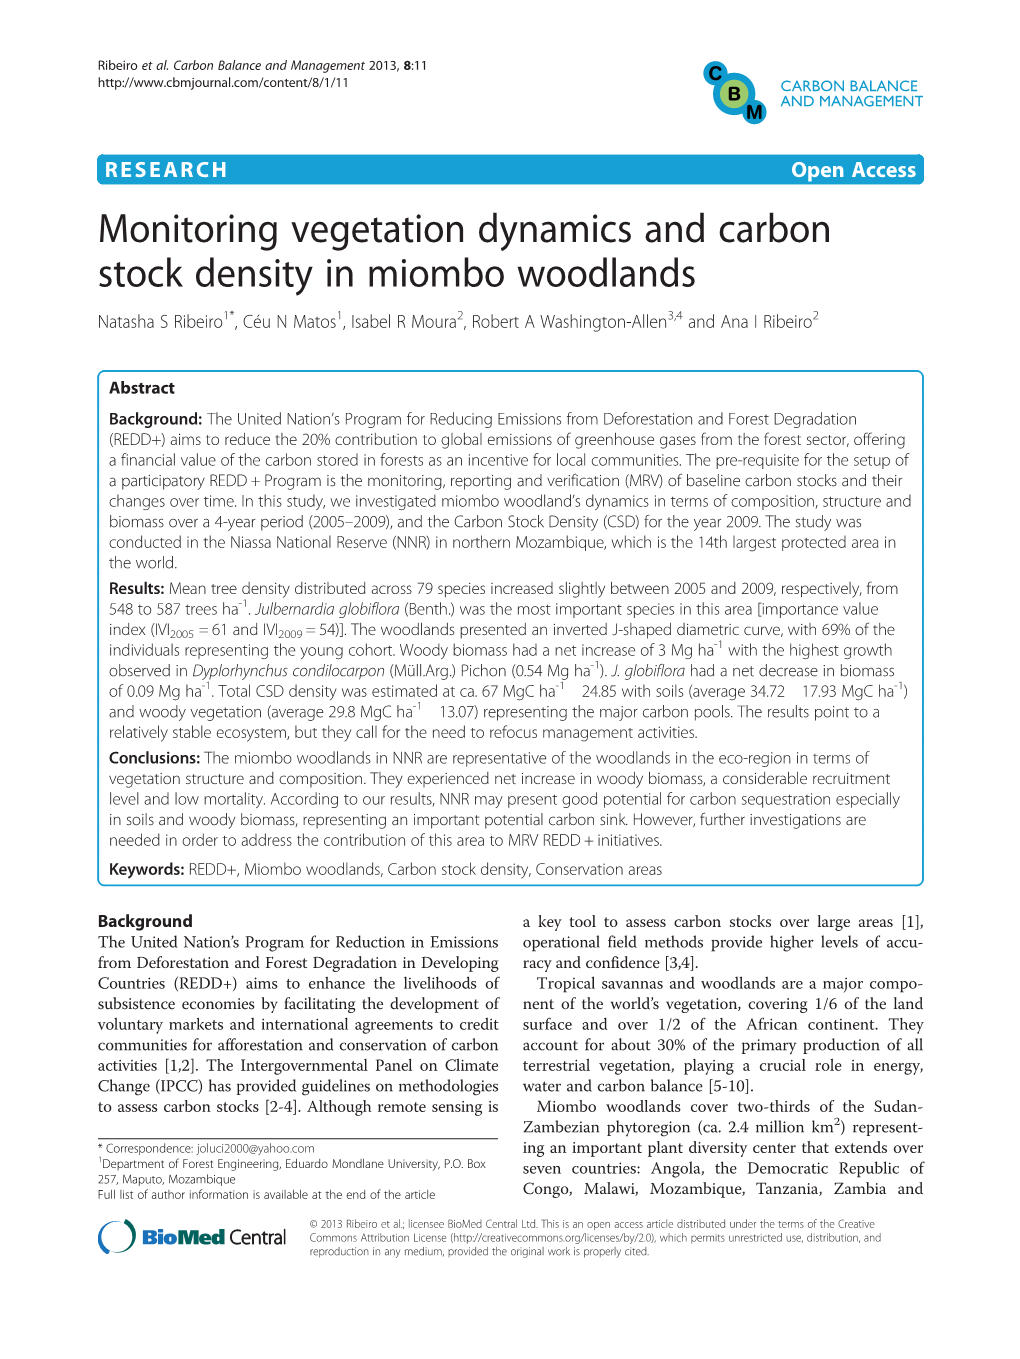 Monitoring Vegetation Dynamics and Carbon Stock Density in Miombo